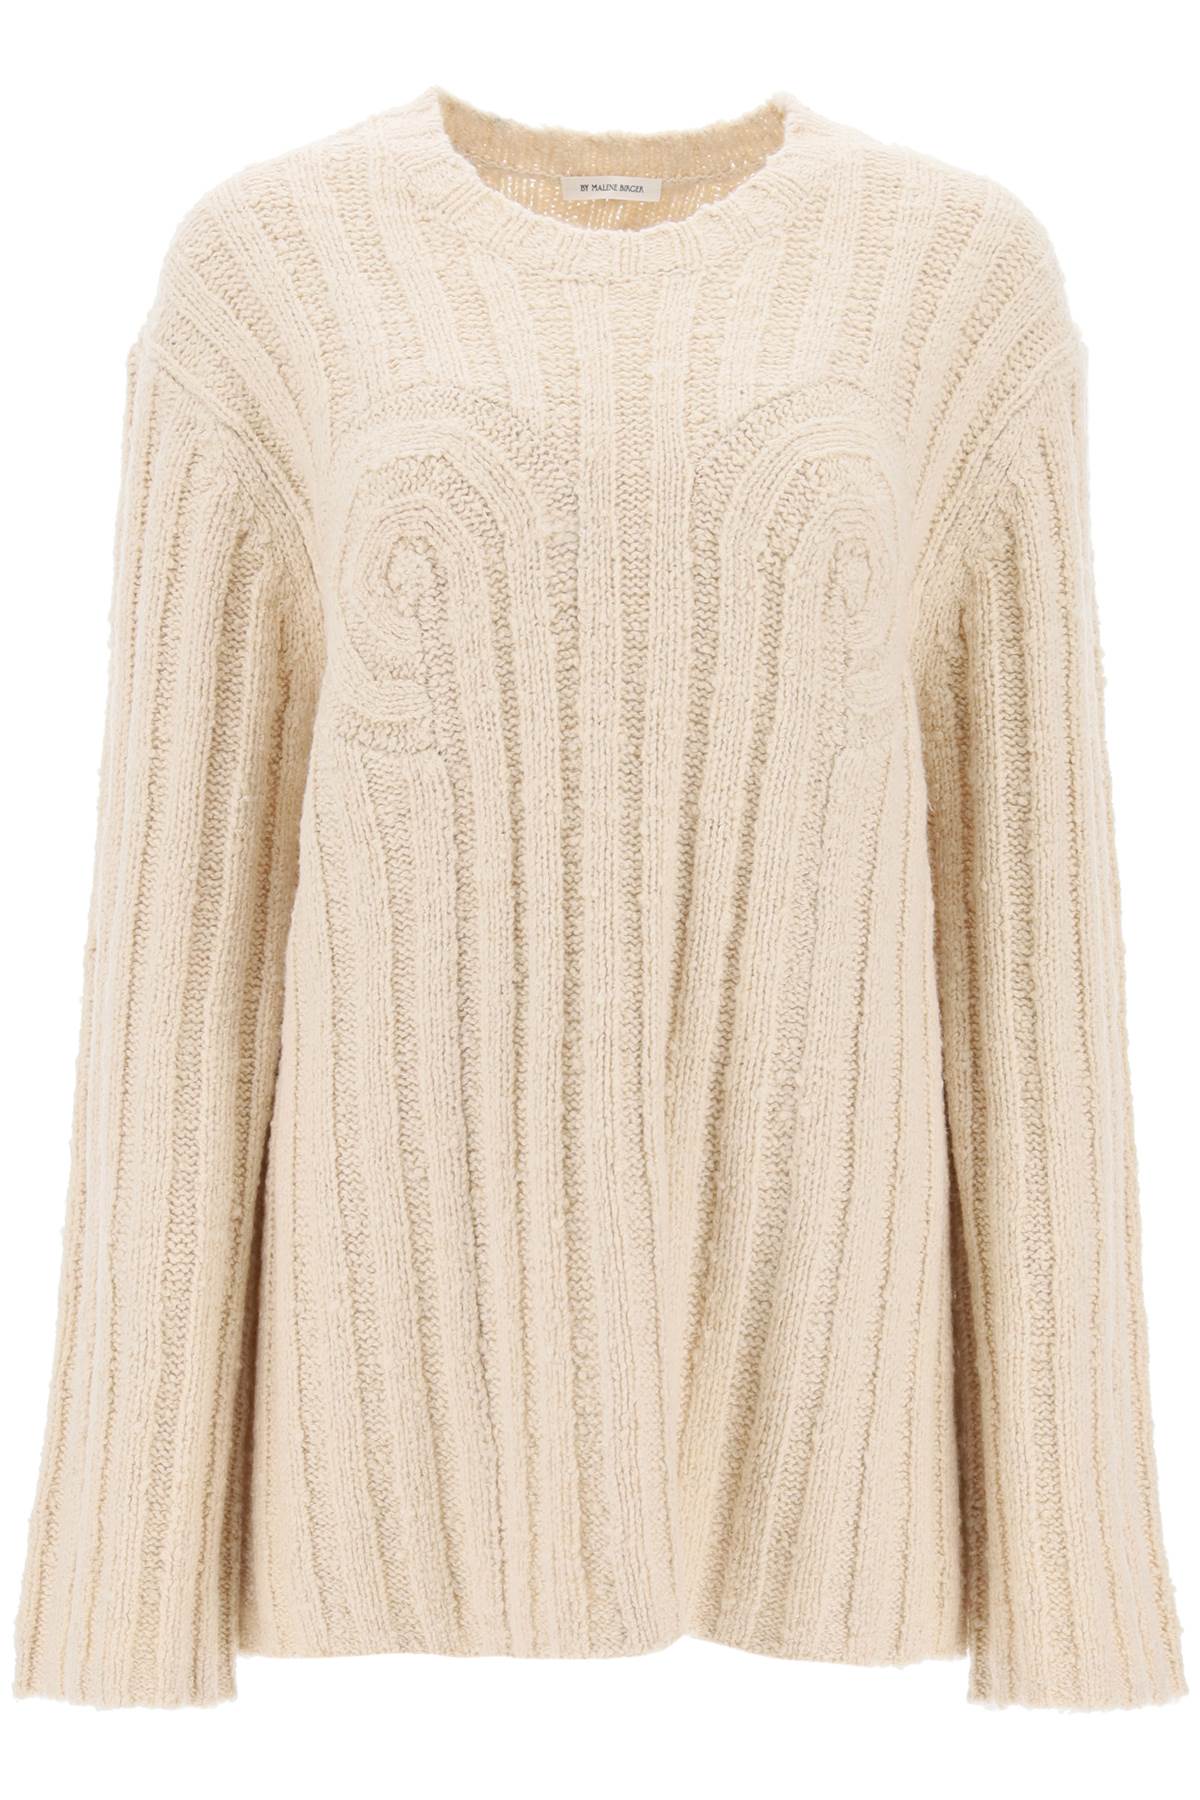 By Malene Birger Replace With Double Quotecirra Ribbed Knit Pul   Beige